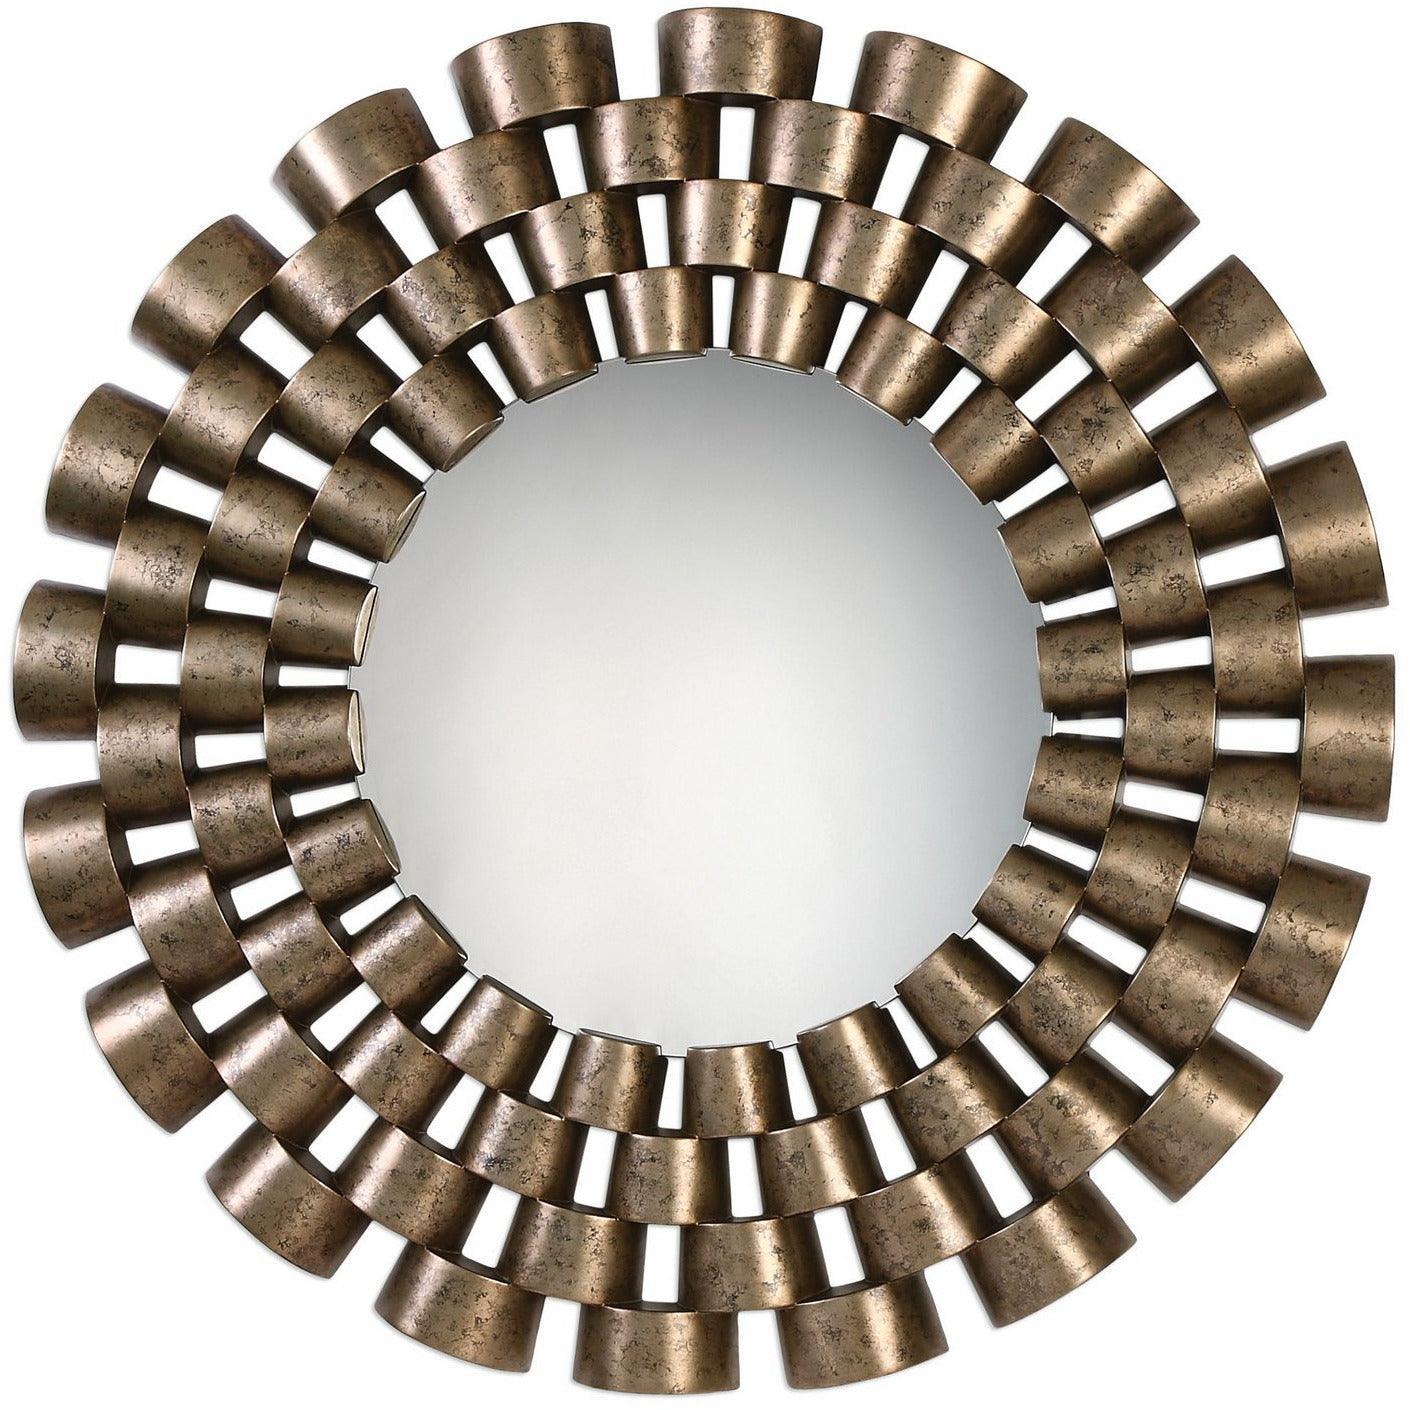 The Uttermost - Taurion Mirror - 09136 | Montreal Lighting & Hardware